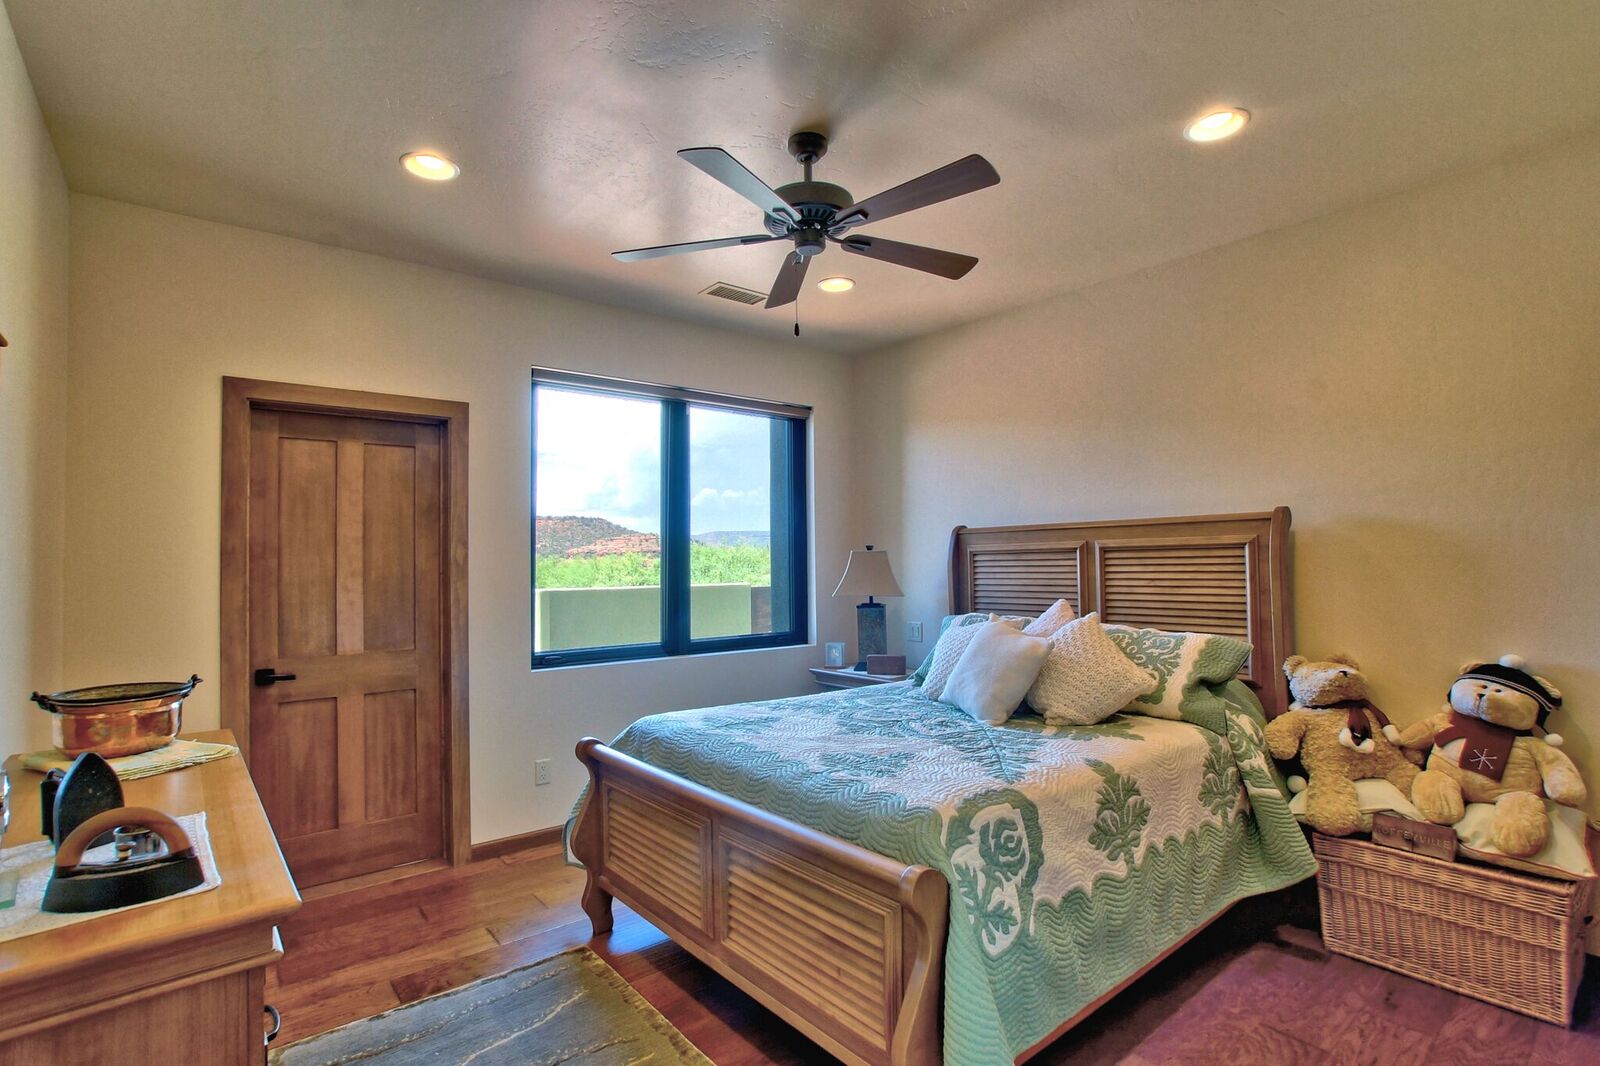 A bedroom with a bed, ceiling fan and door.